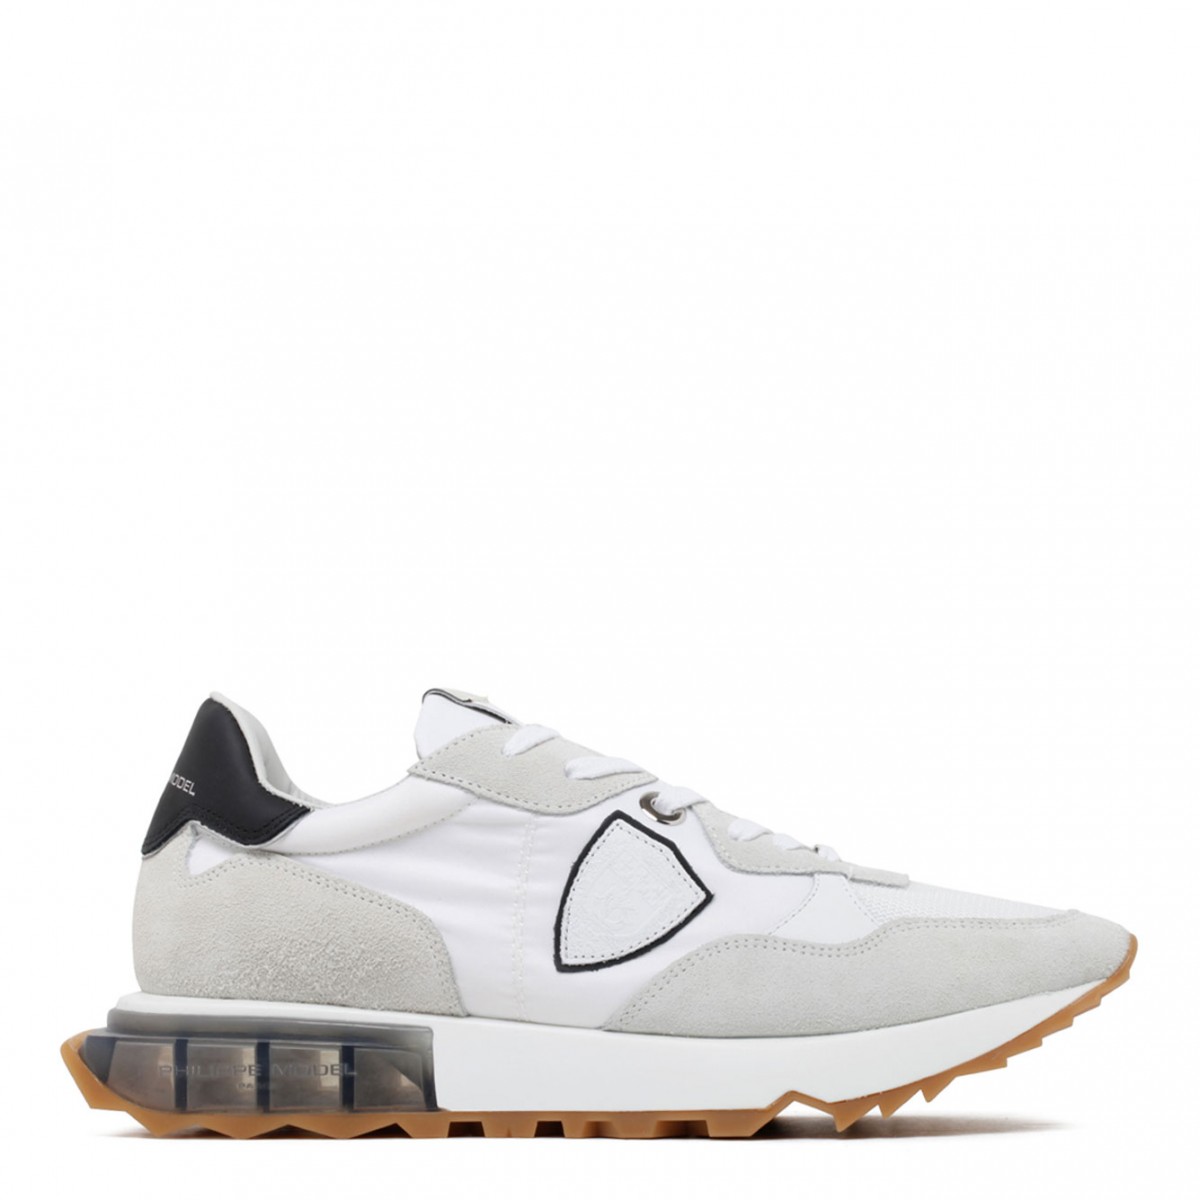 White, Beige and Black Leather Royale Mondial Sneakers